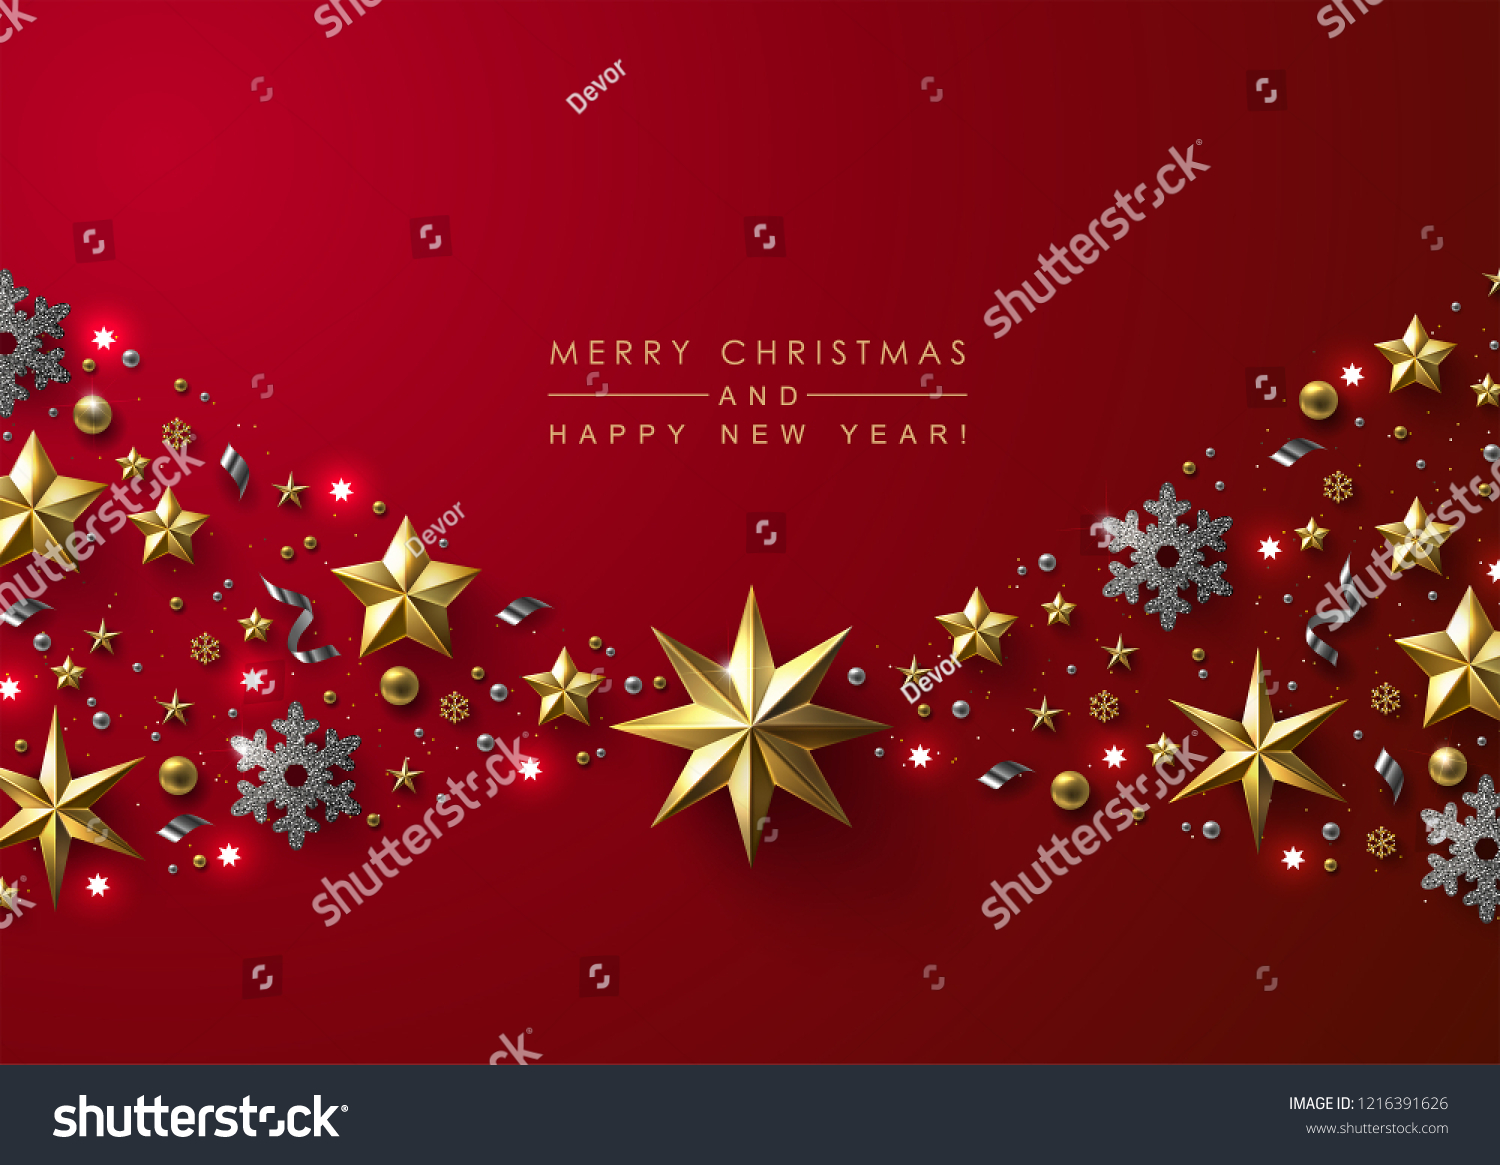 Red Christmas Background with Border made of Cutout Gold Foil Stars and Silver Snowflakes. Chic Christmas Greeting Card. #1216391626